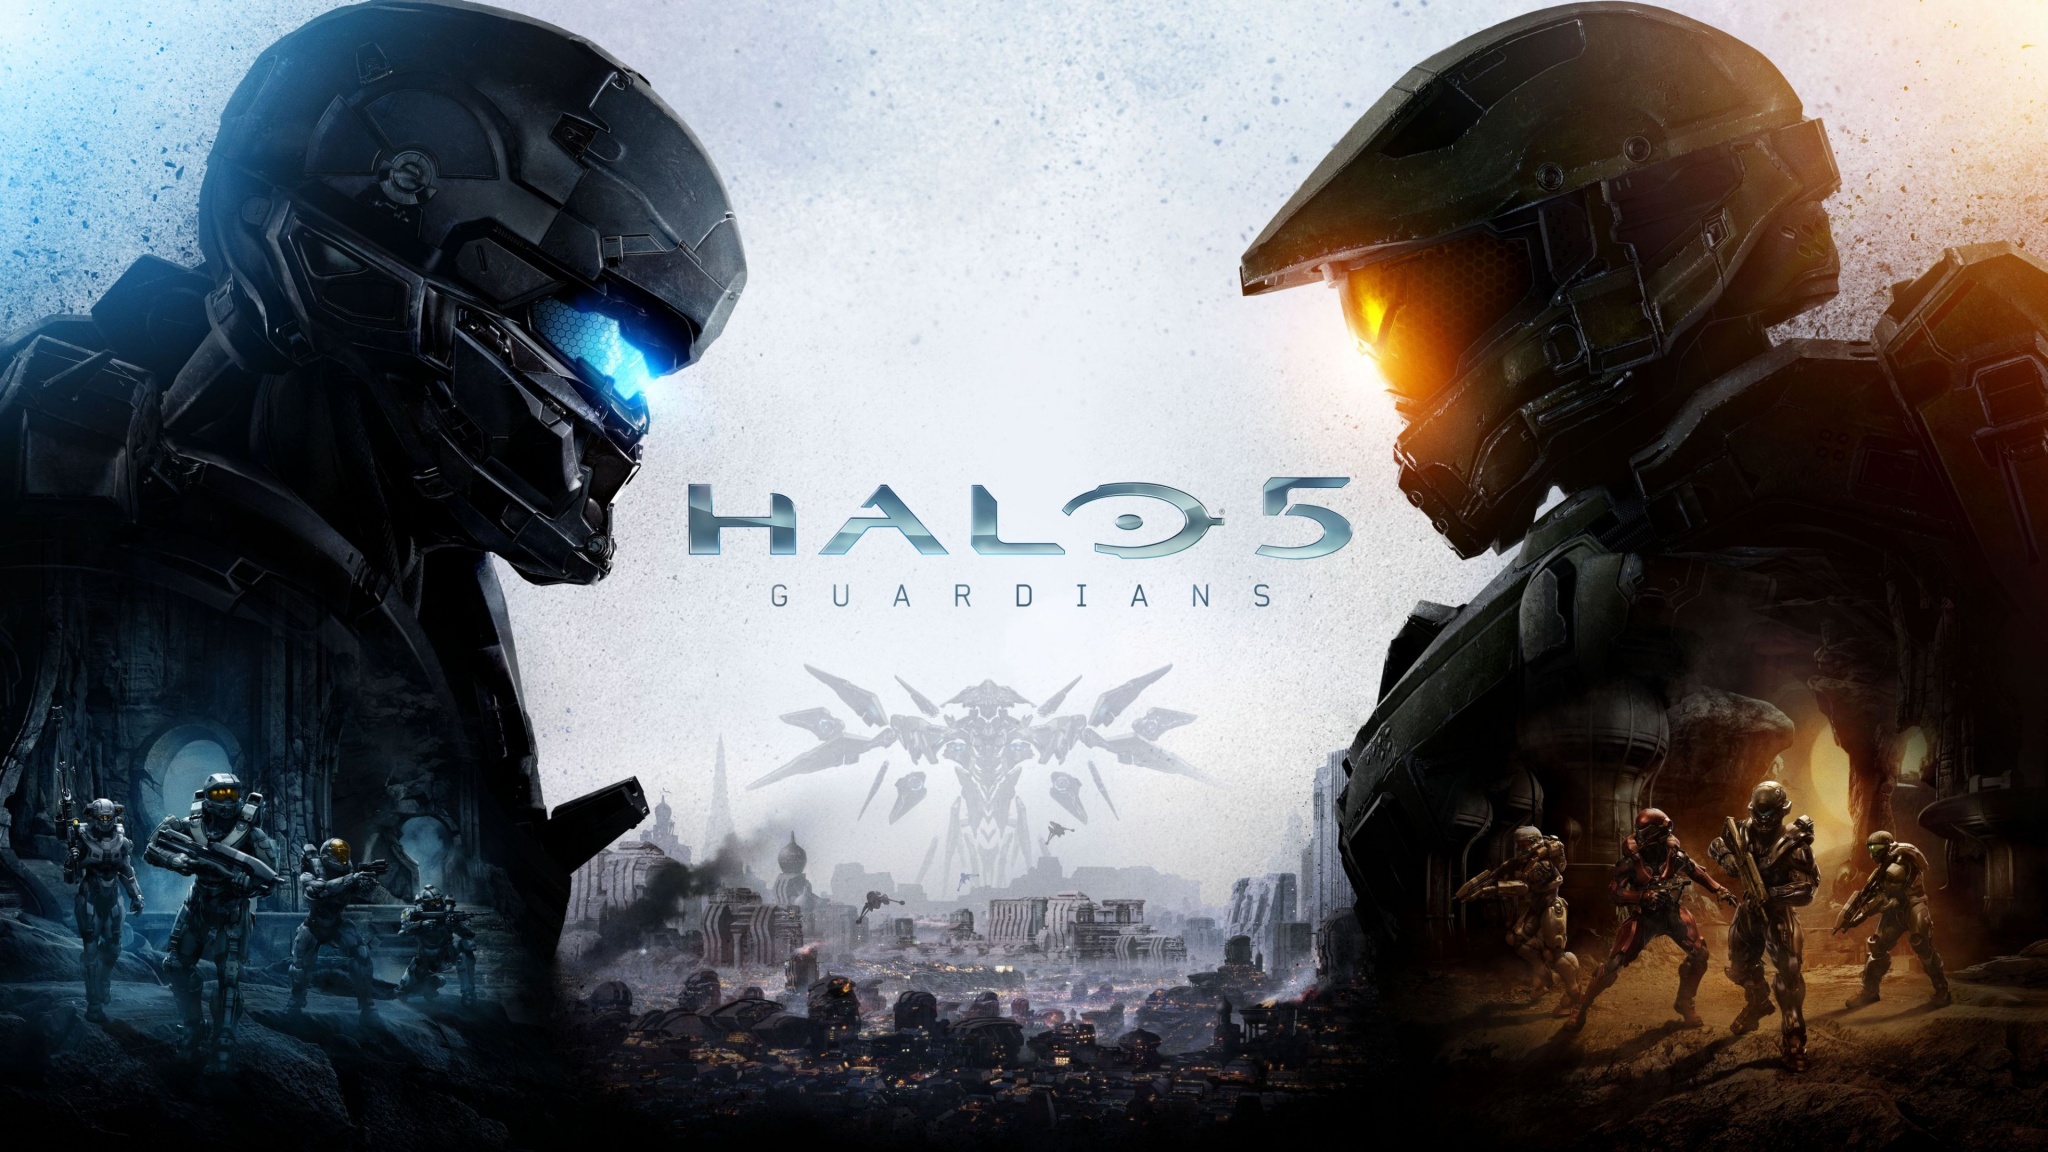 Halo 5 Guardians Poster 2048 x 1152 Download Close